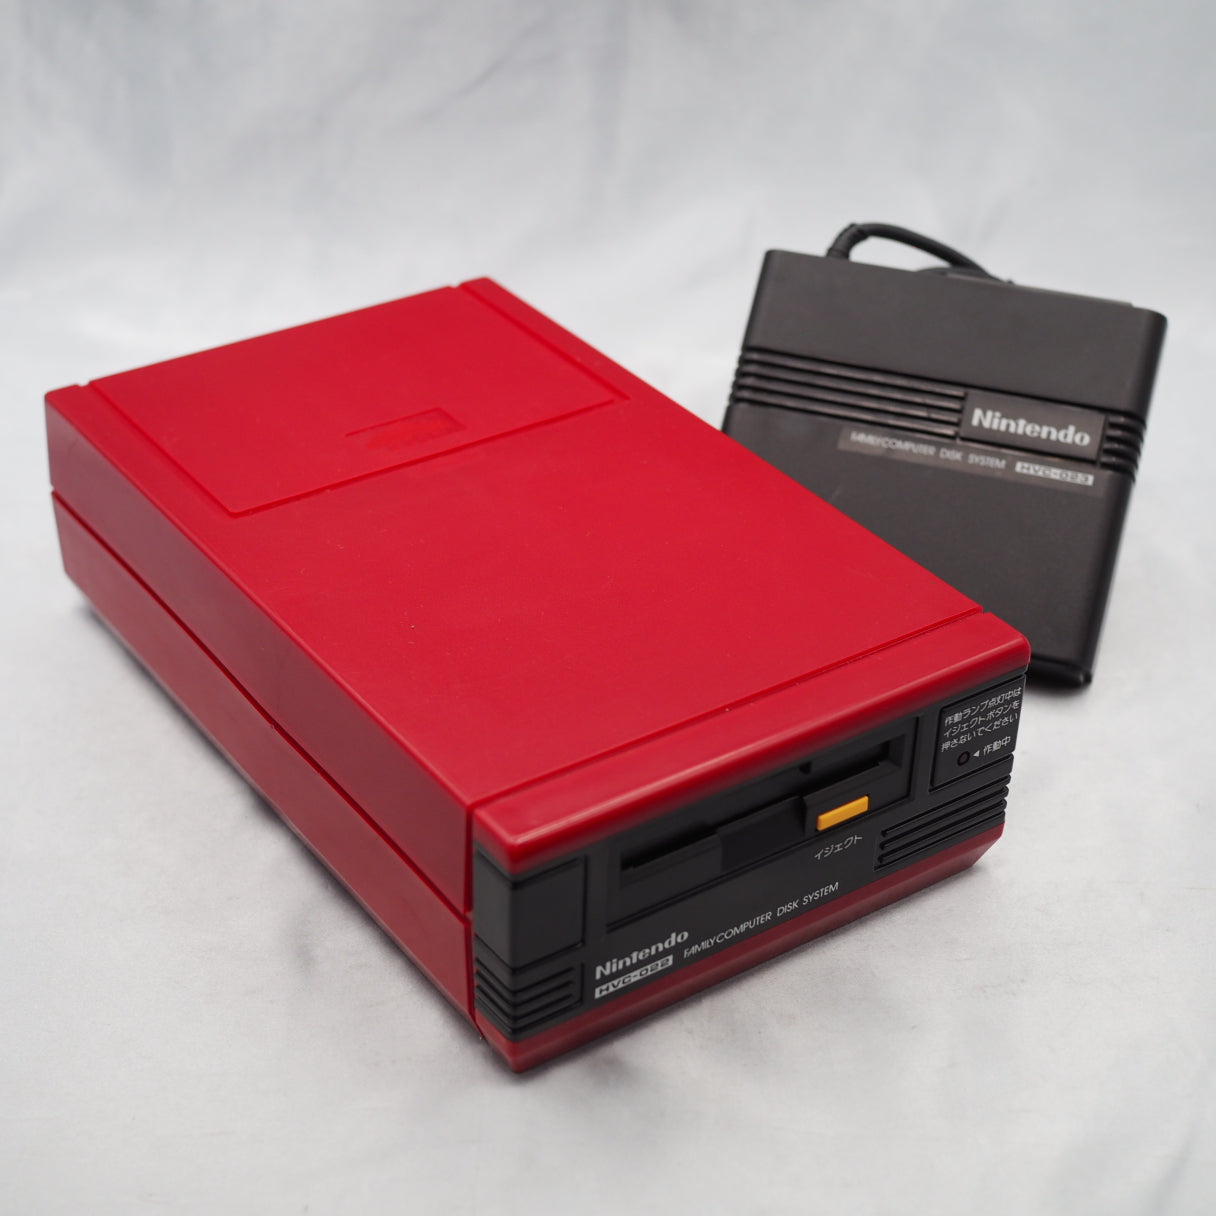 Nintendo Disk System HVC-022 [New Rubber Belt Replaced]